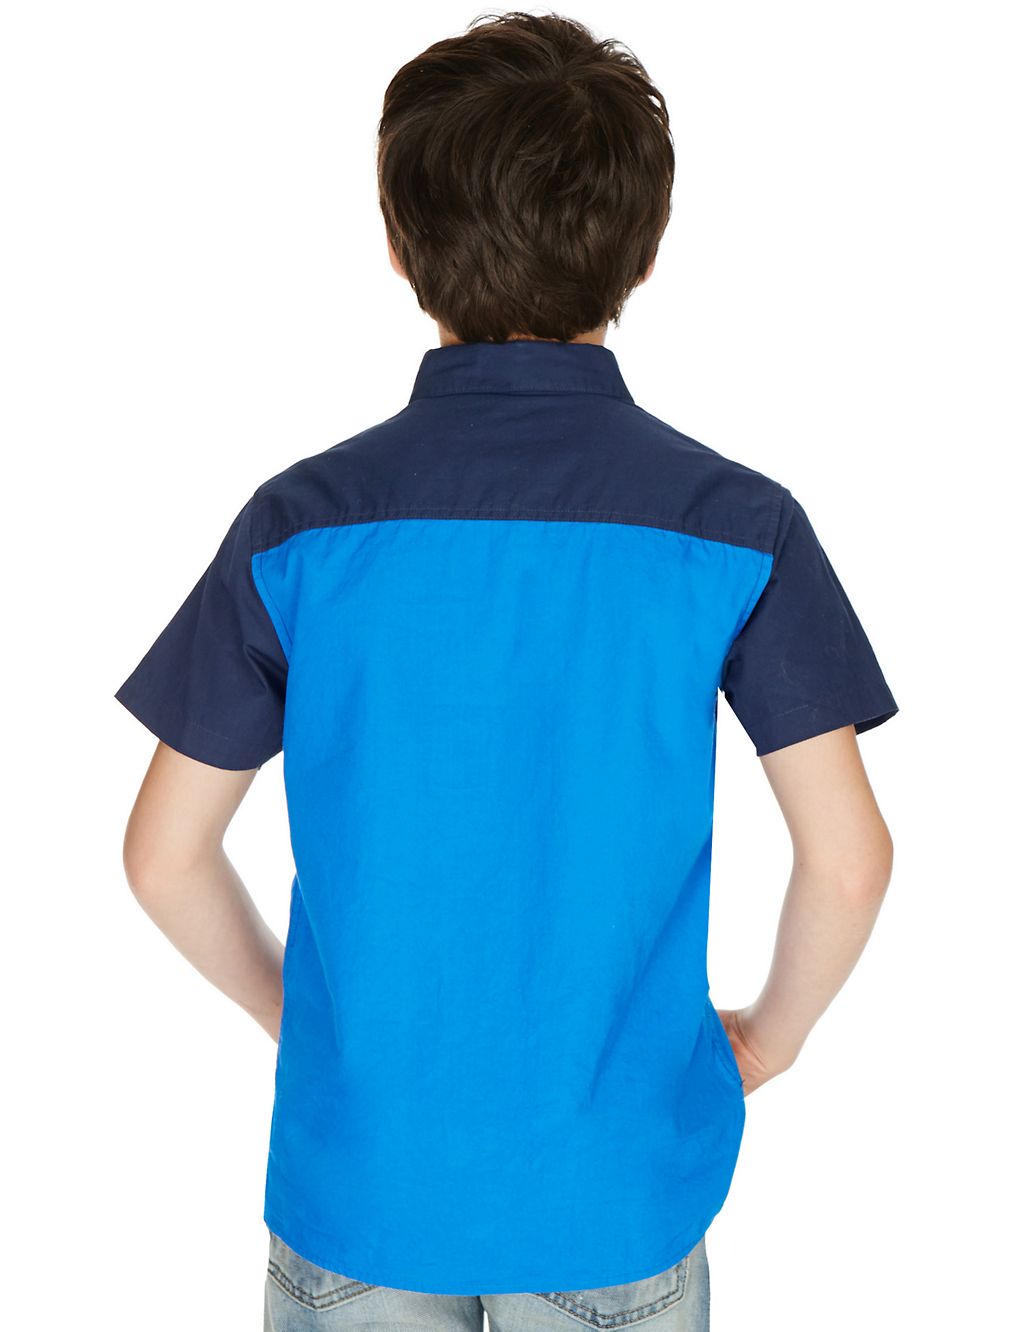 Pure Cotton Colour Block Shirt (5-14 Years) 2 of 3